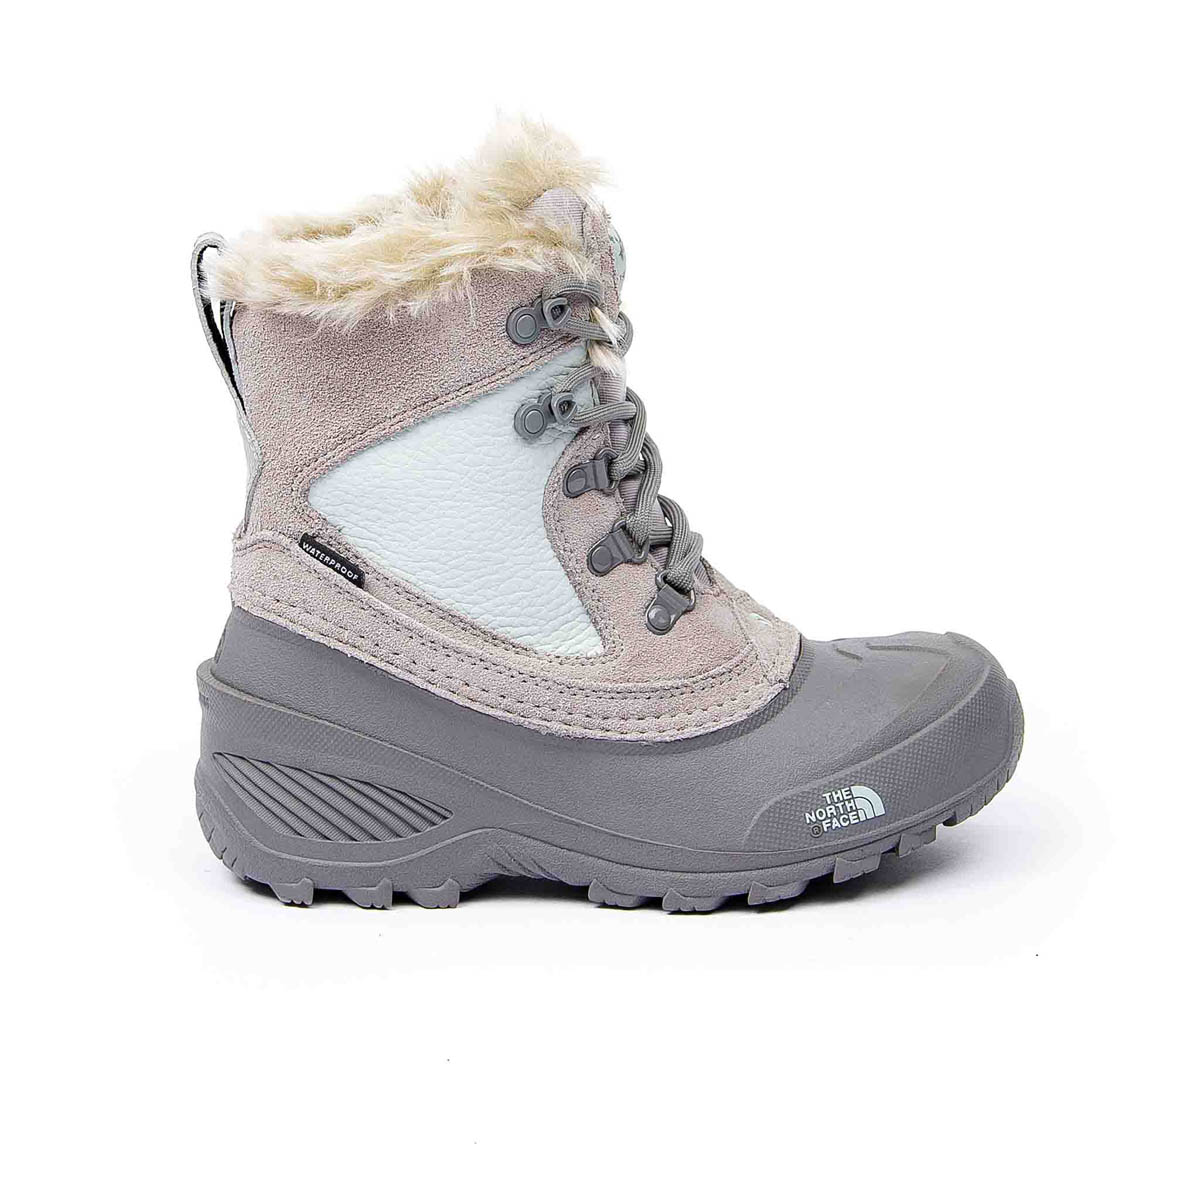 THE NORTH FACE - SHELLISTA EXTREME BOOTS